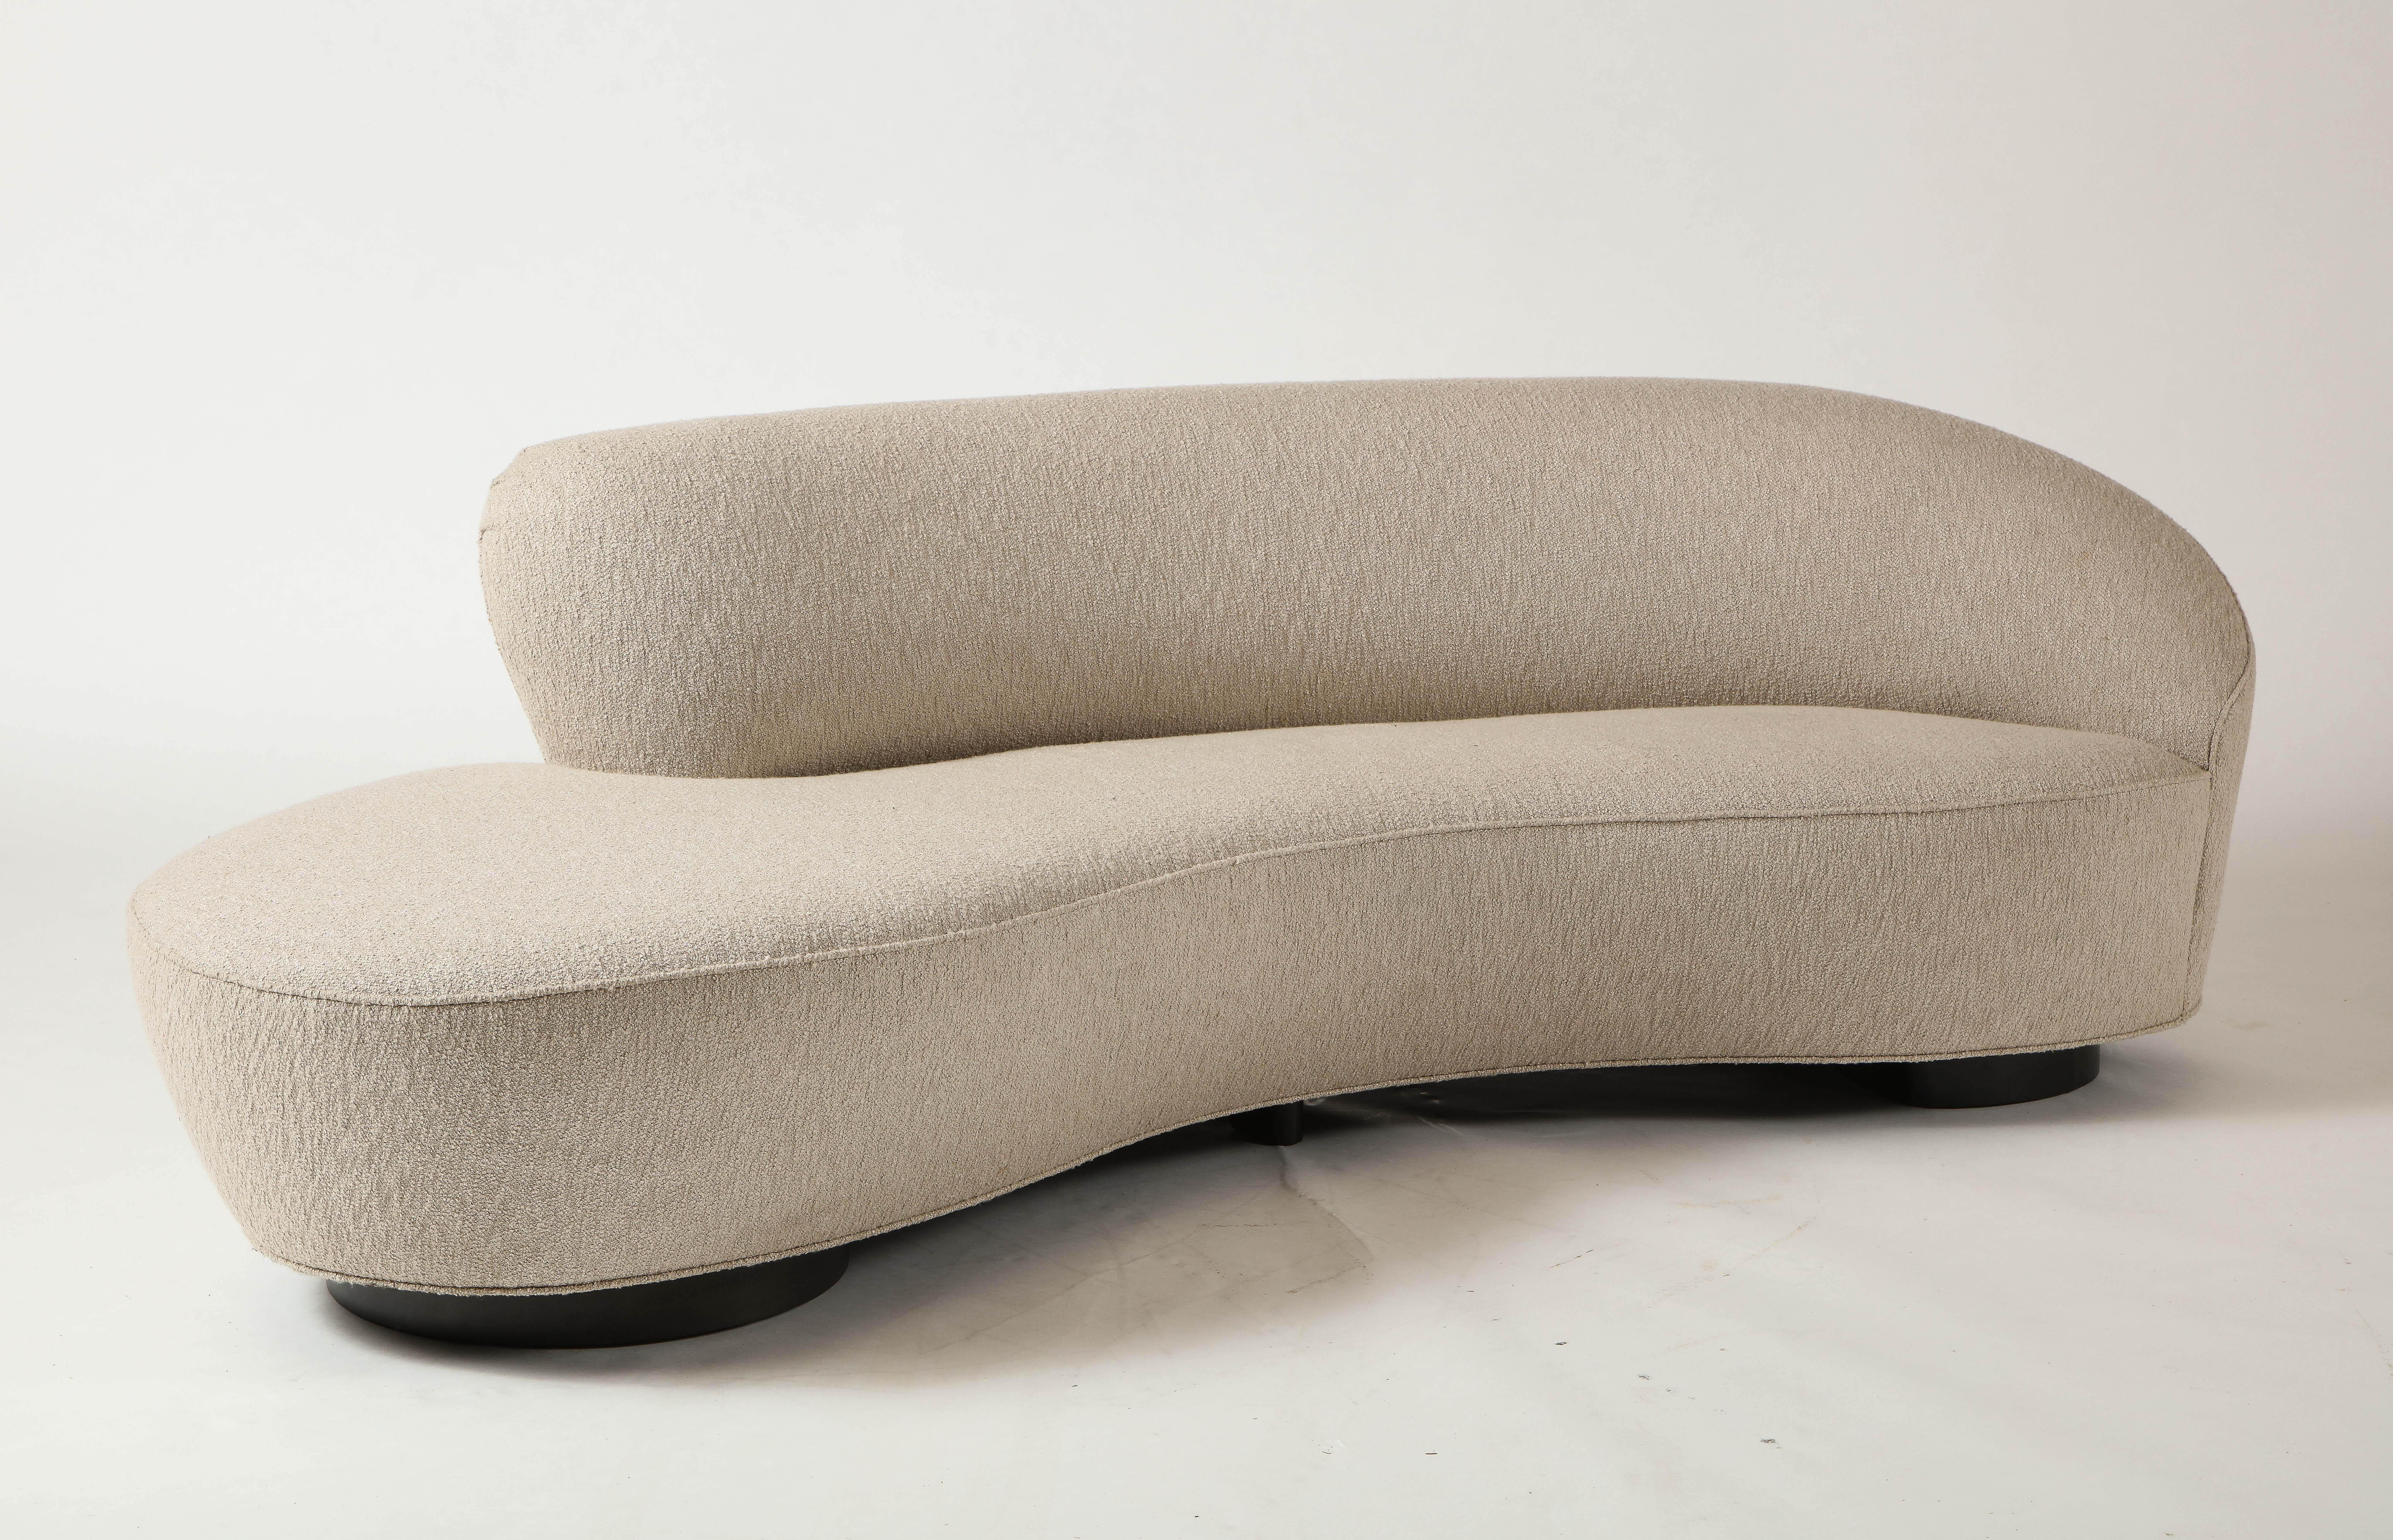 A smaller scale alternative to our iconic Freeform, the Mini Sofa is proportioned to emphasize its unique shape. Time-honored handcraft ensures reliable comfort and signature durability; decades of expertise means customizations exist to suit any